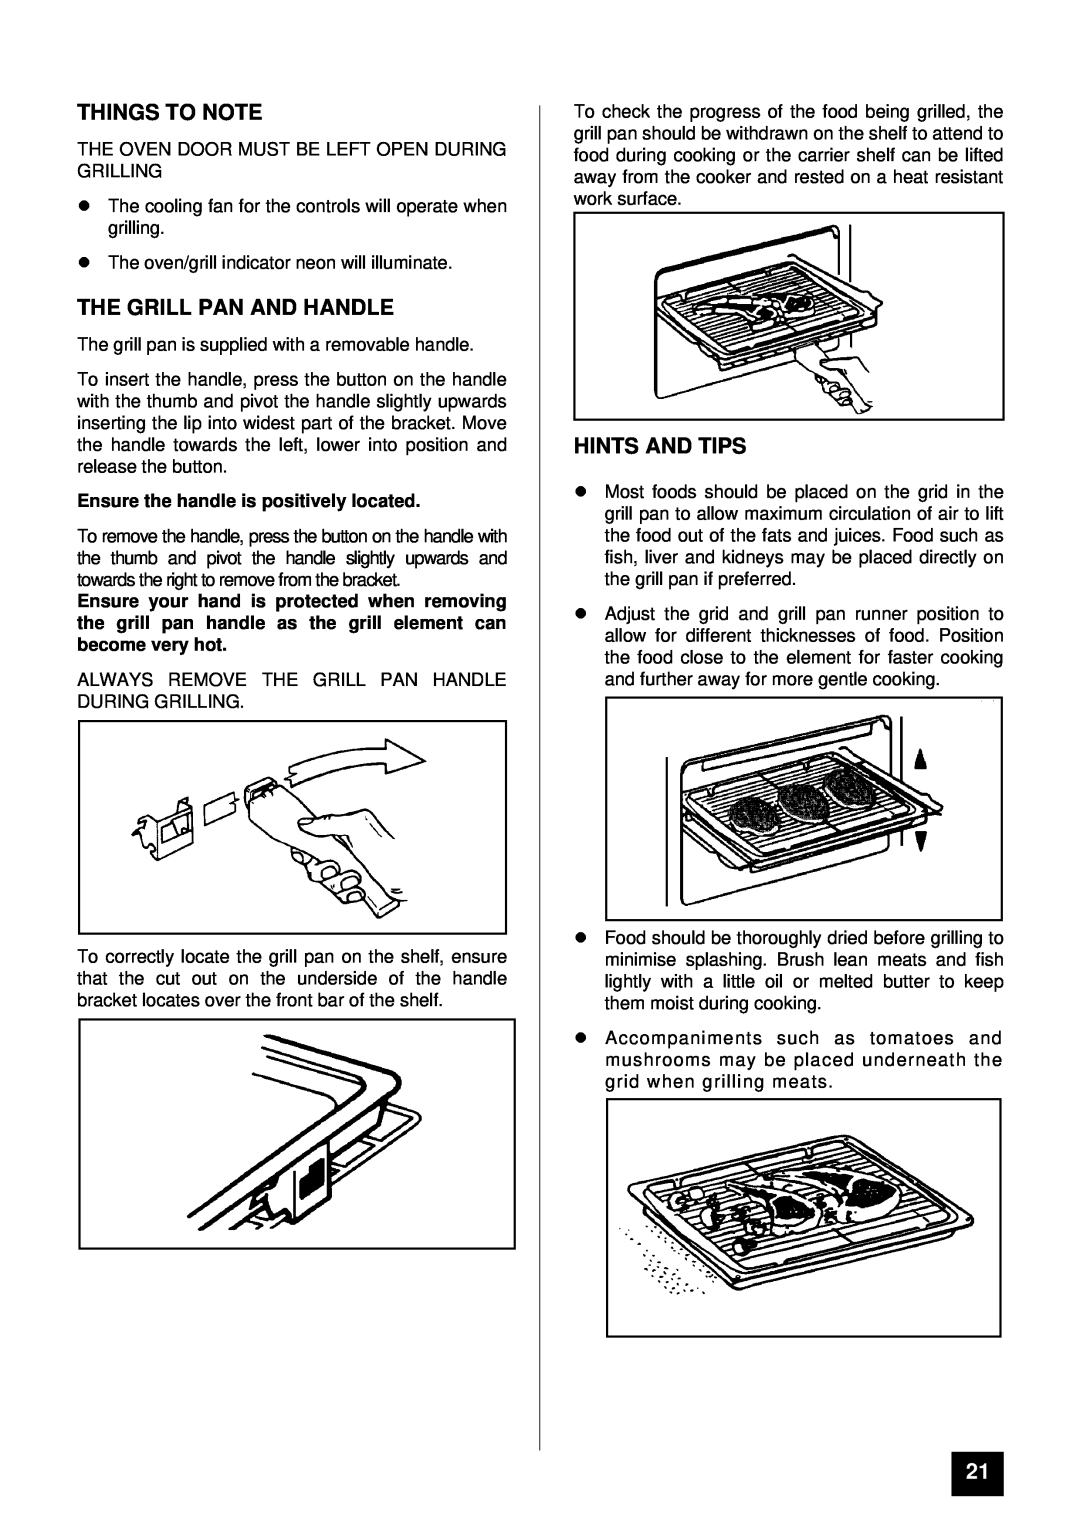 Tricity Bendix BS 615 SO Things To Note, The Grill Pan And Handle, Hints And Tips, Ensure the handle is positively located 